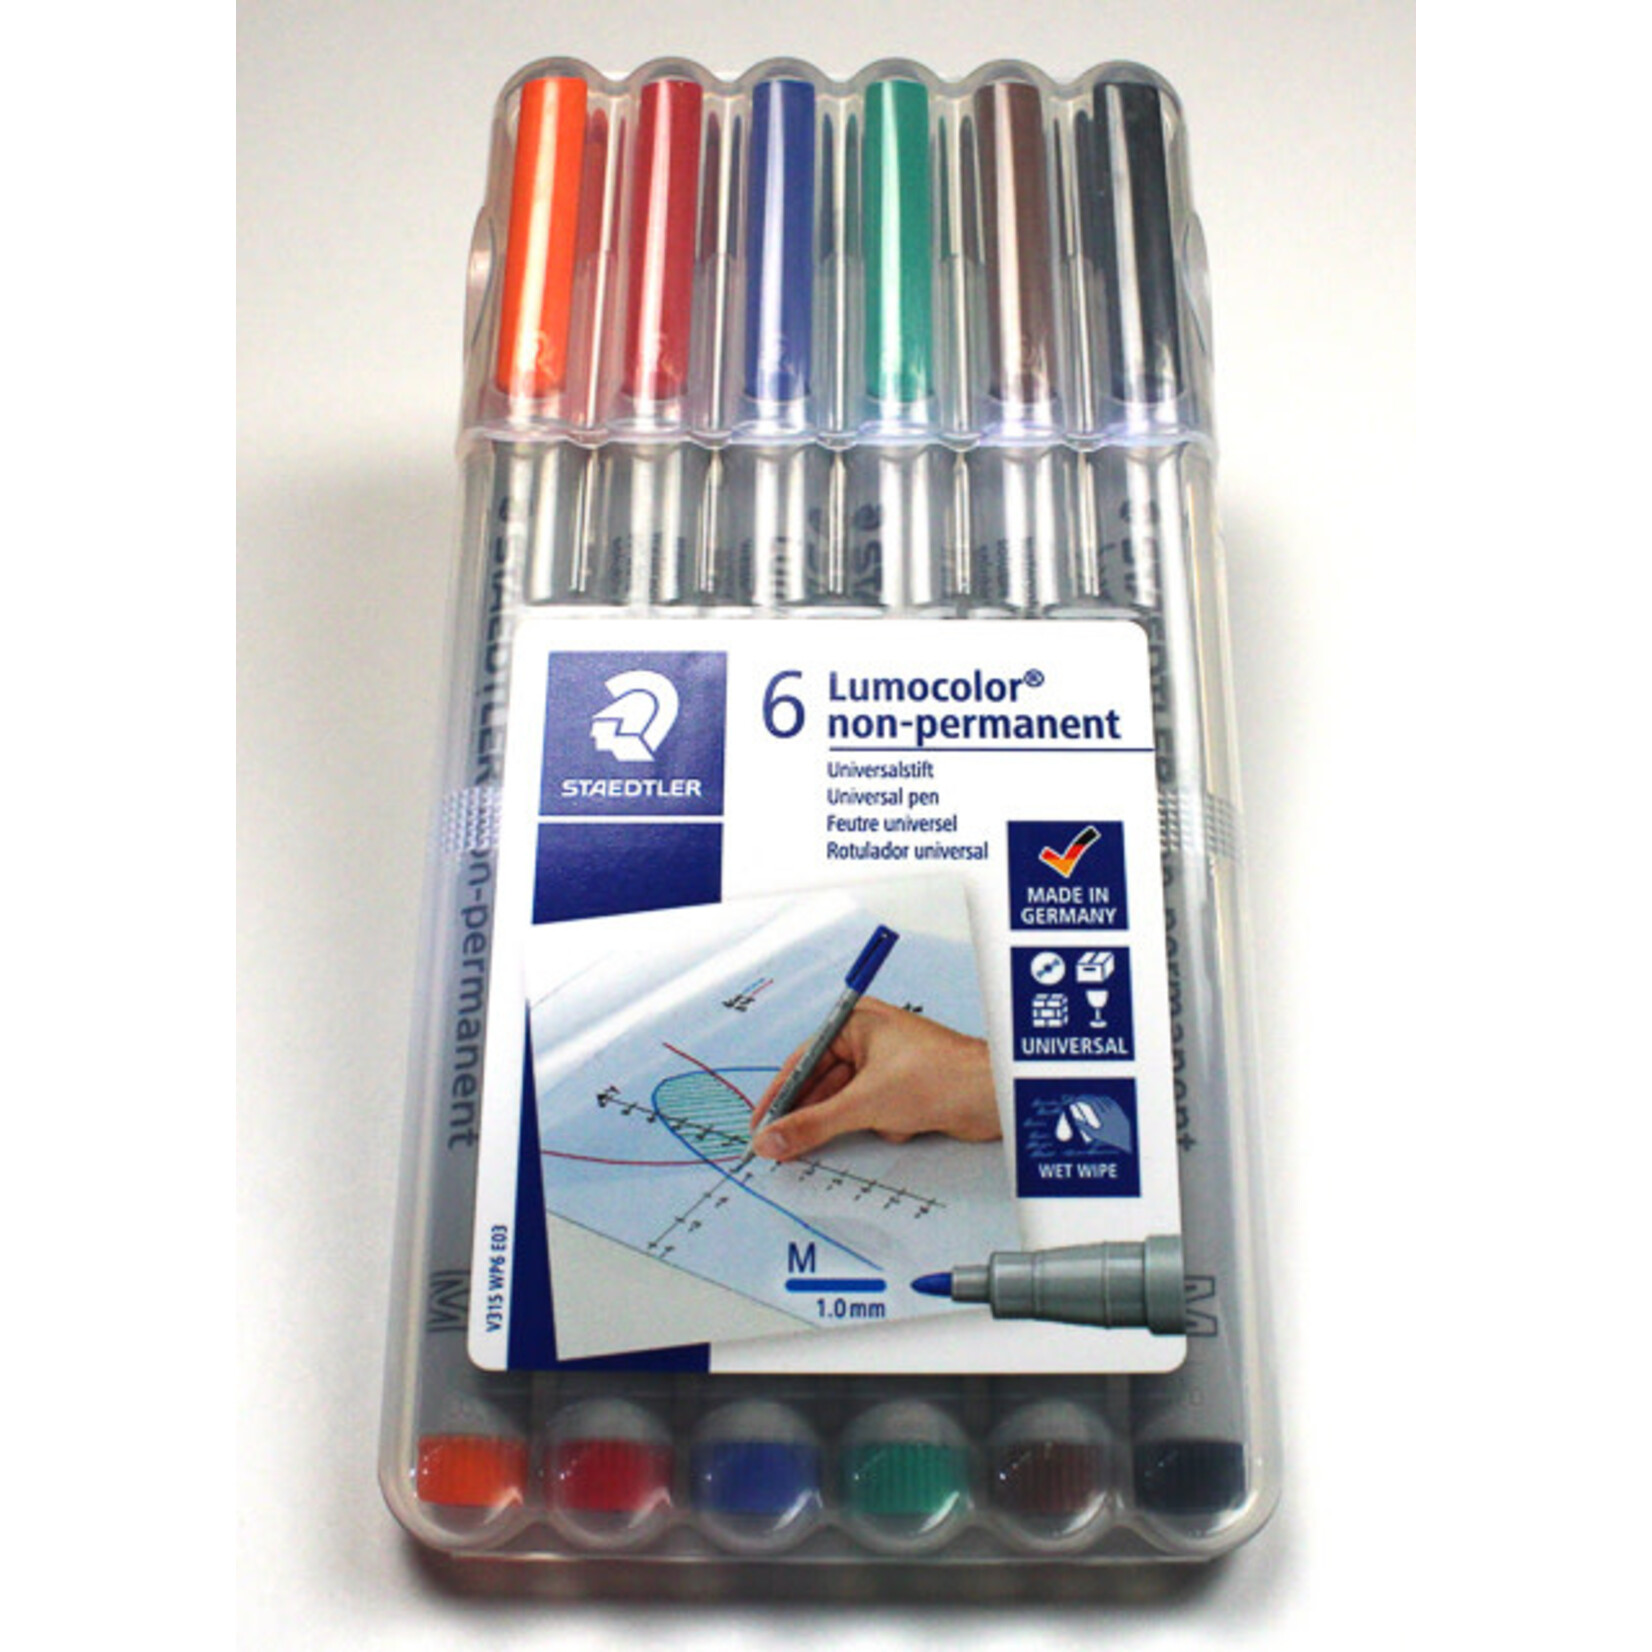 Chessex Water Soluble 6-Pack Markers Medium-Tip (1 each Red, Blue, Green, Black, Orange, and Brown)